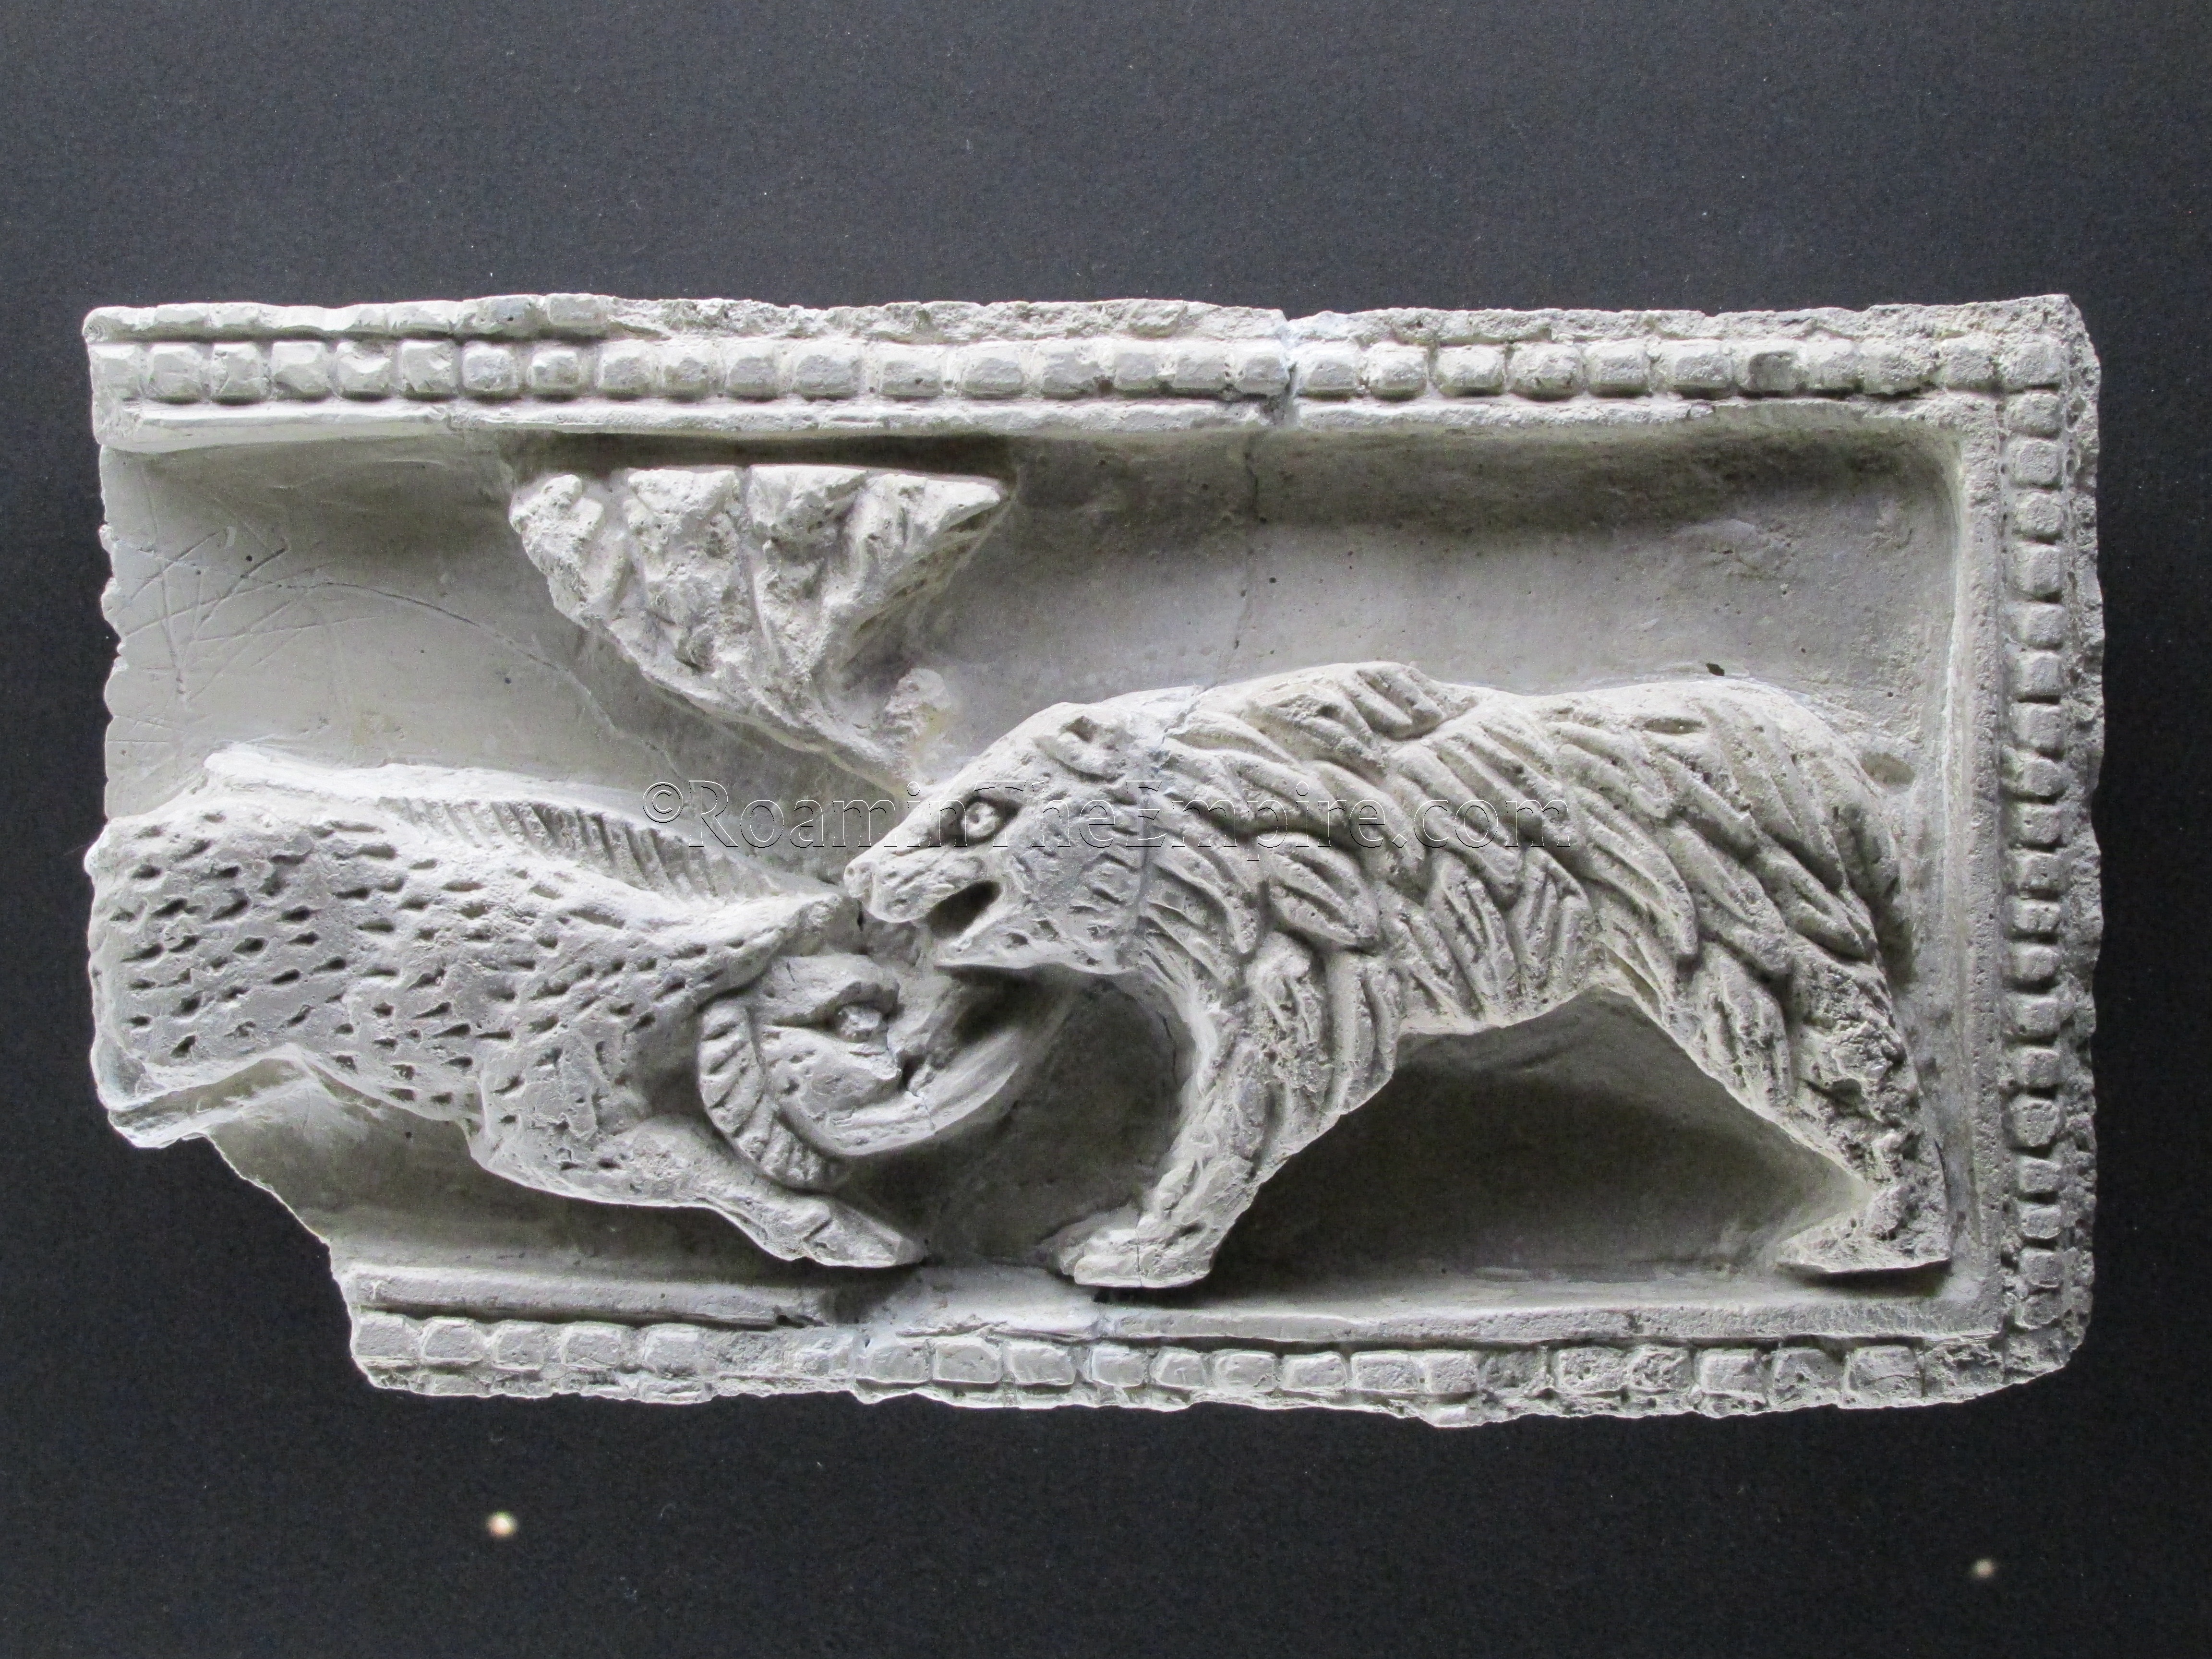 Stucco relief of a wild boar and a bear, from Villajoyosa, dated to the 3rd-4th century CE.